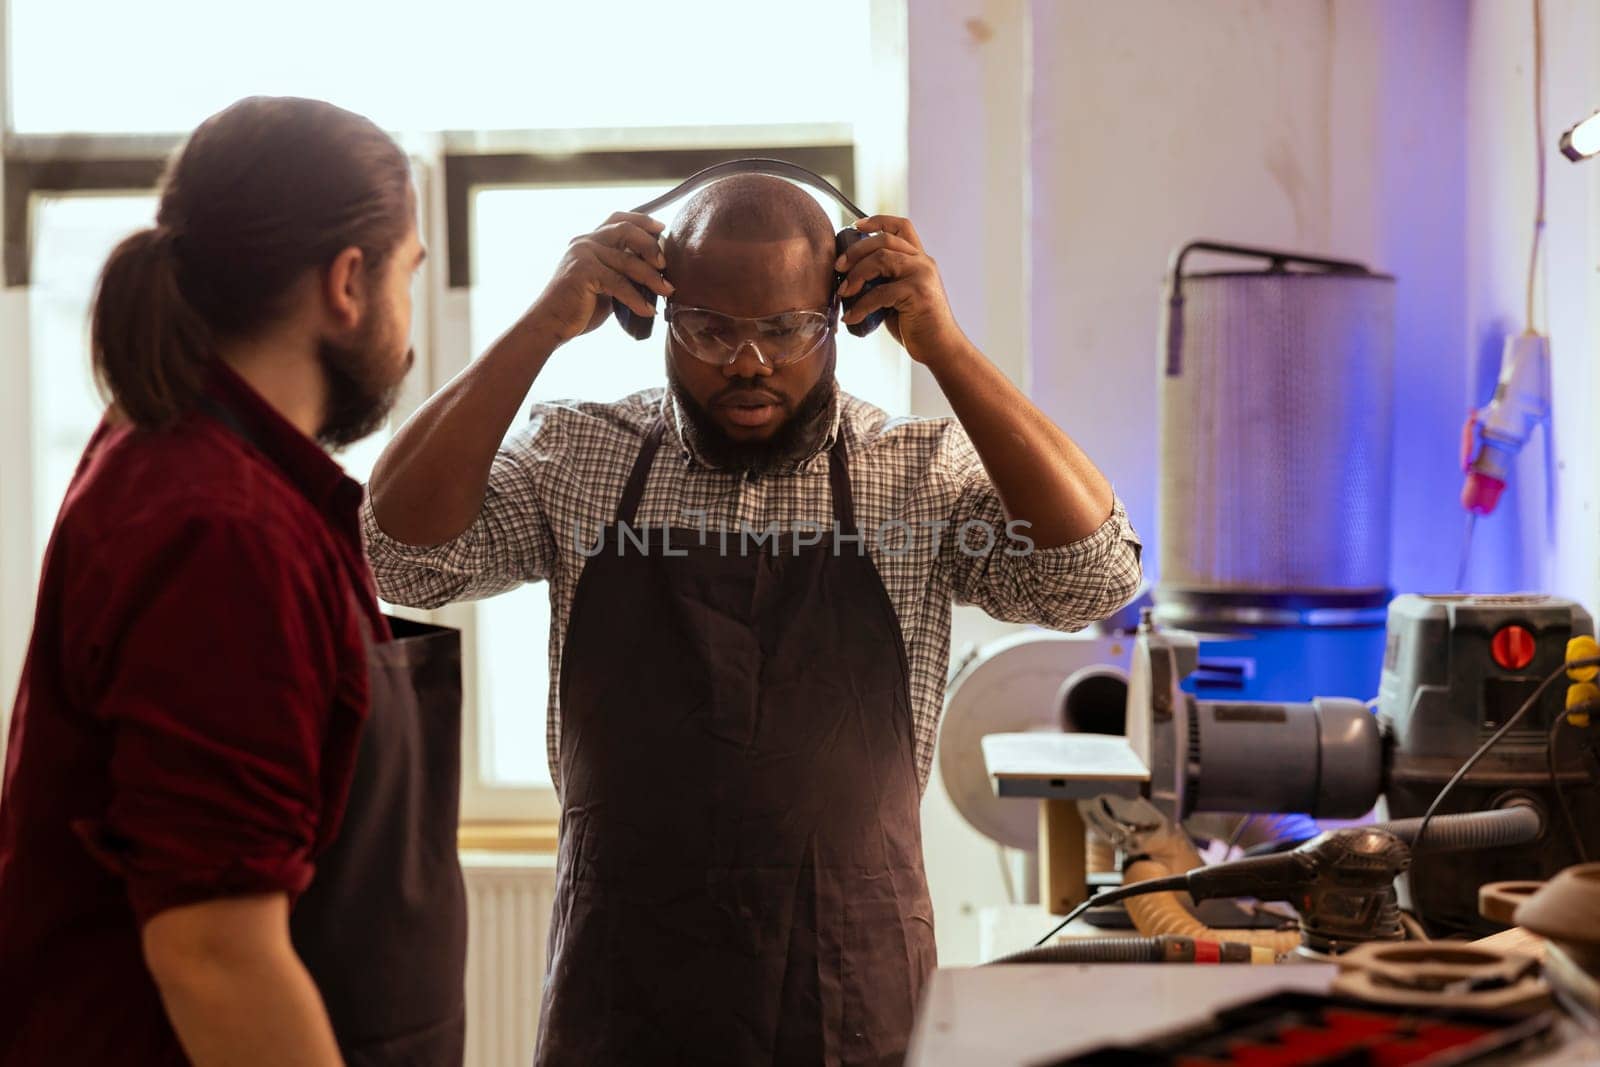 Cabinetmaker making sure apprentice uses safety earmuffs and glasses by DCStudio